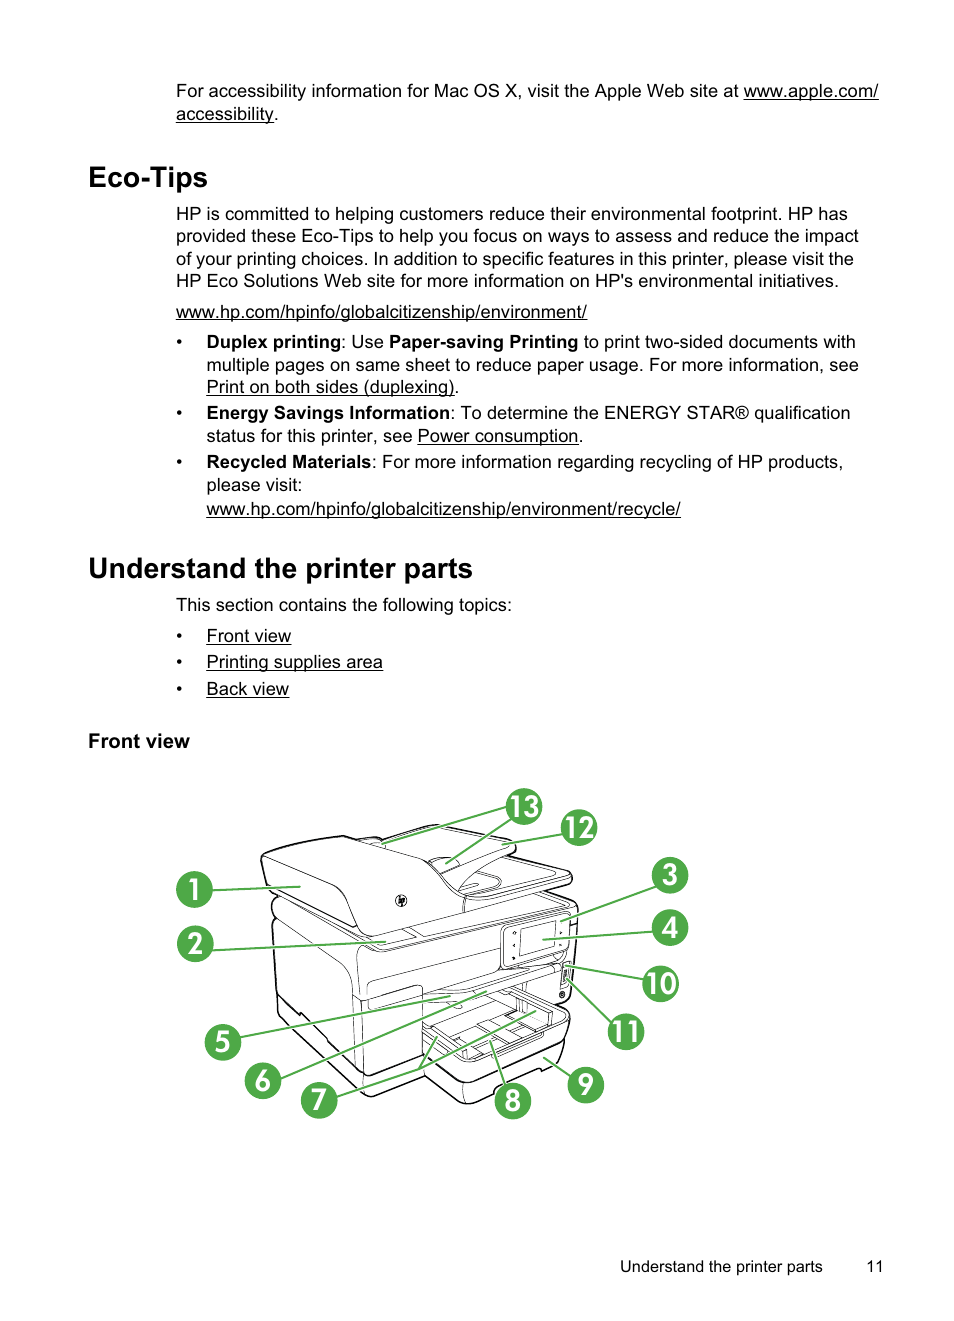 Eco-tips, Understand the printer parts, Front view | Eco-tips understand the printer parts, Front view printing supplies area back view | HP Officejet Pro 8500A User Manual | Page 15 / 246